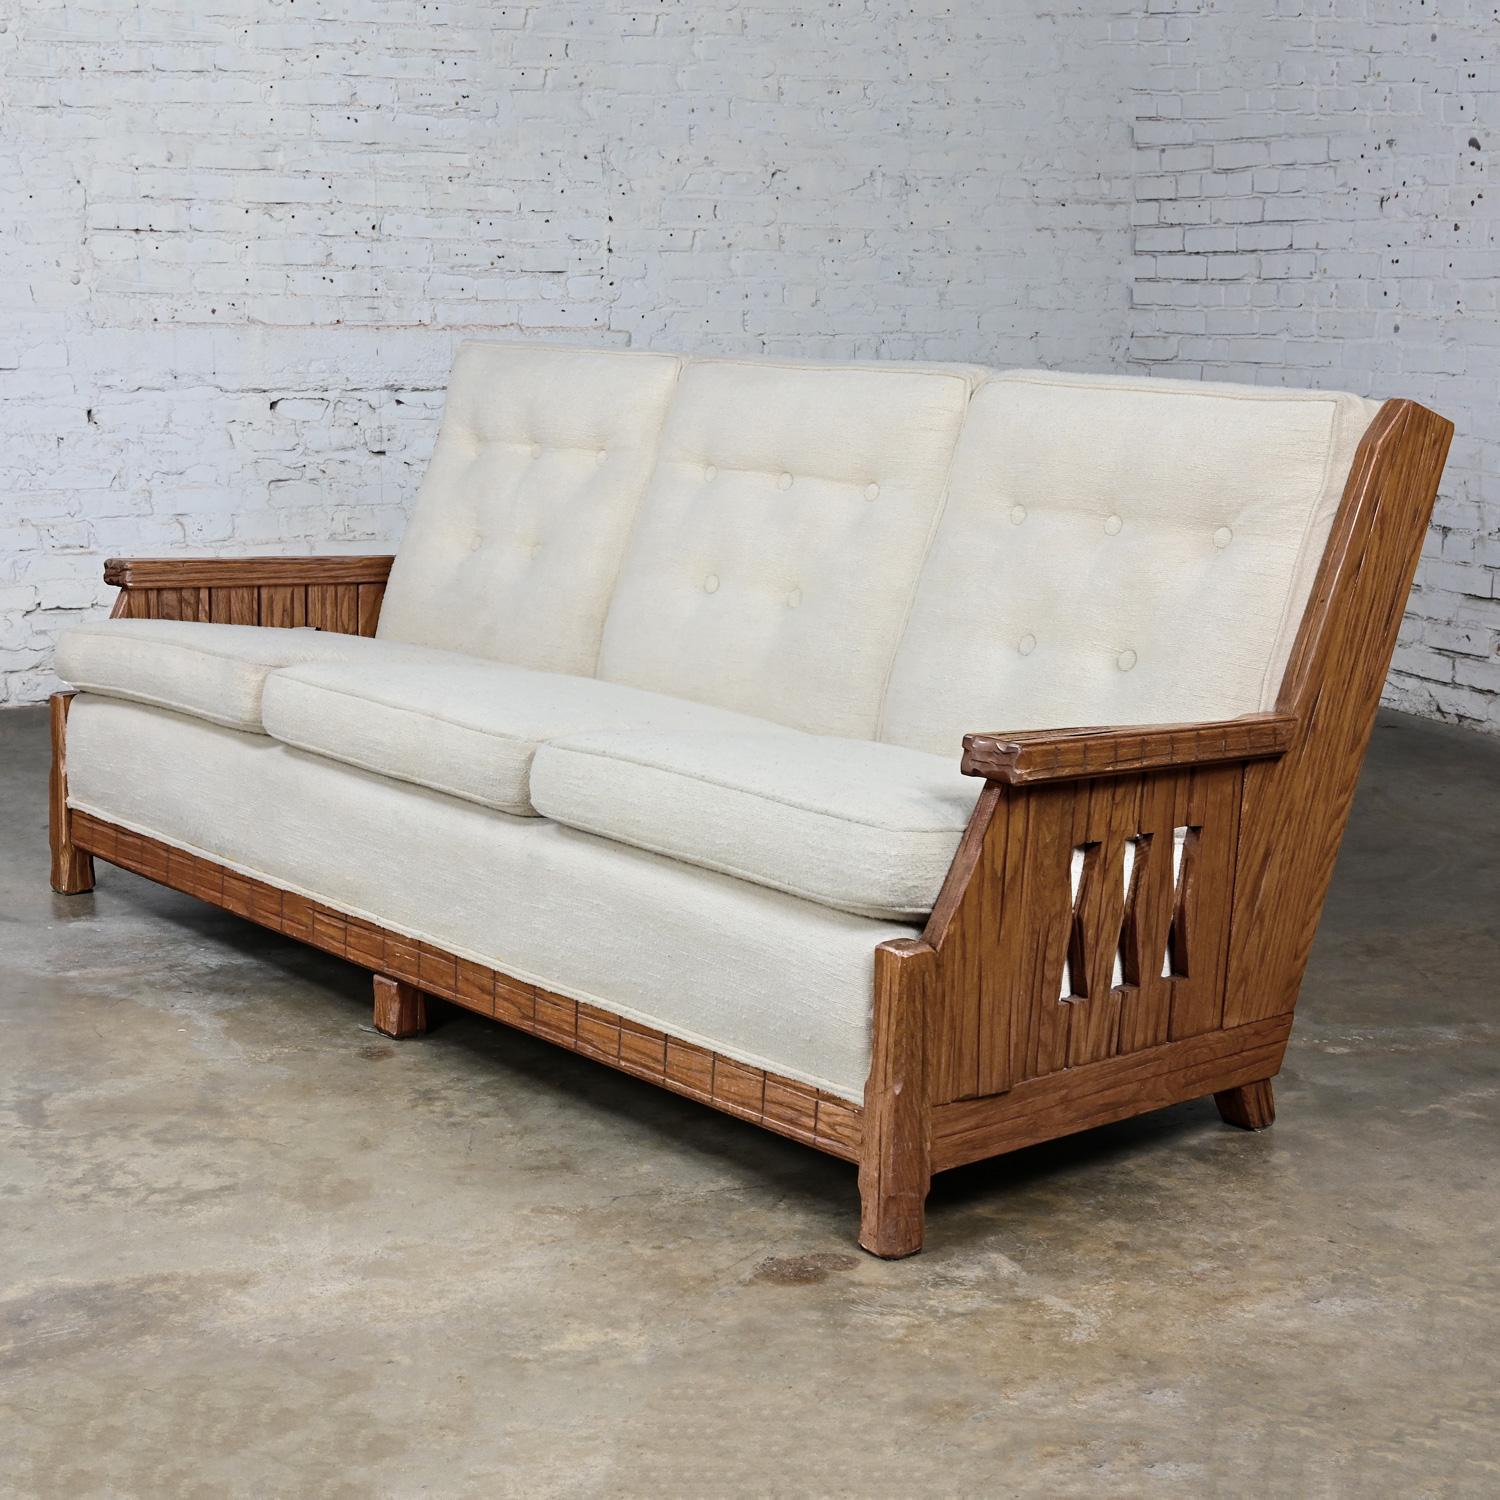 American Mid-20th Century Rustic or Western Style Sofa Attributed to A. Brandt Ranch Oak For Sale